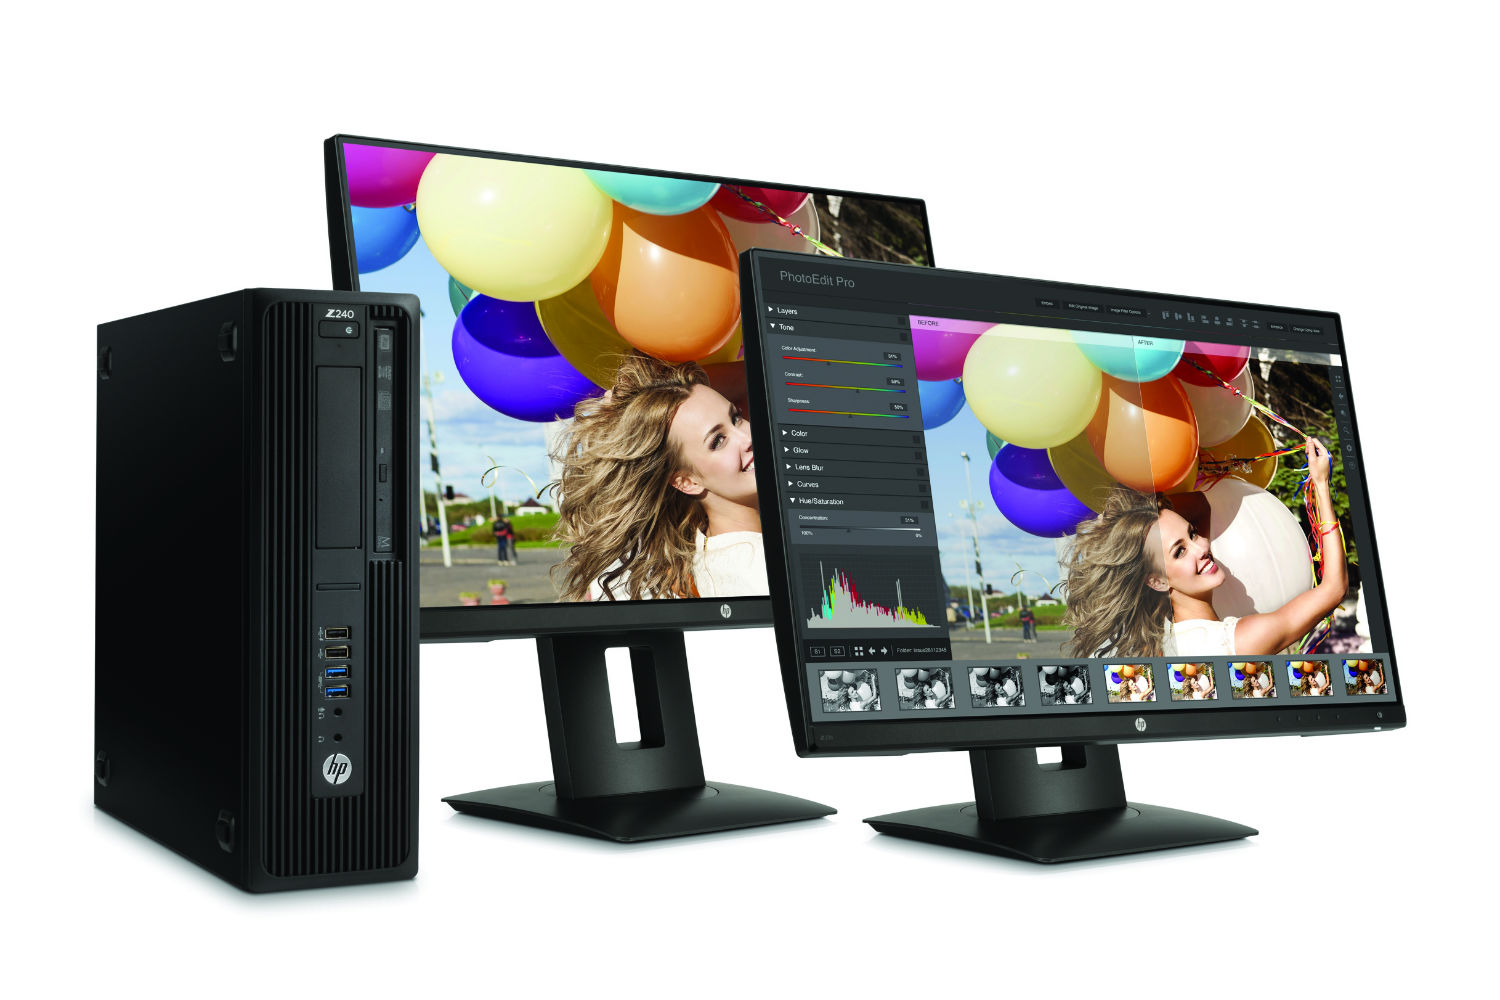 hps new workstations are built with input from real users and it shows hpz240 3